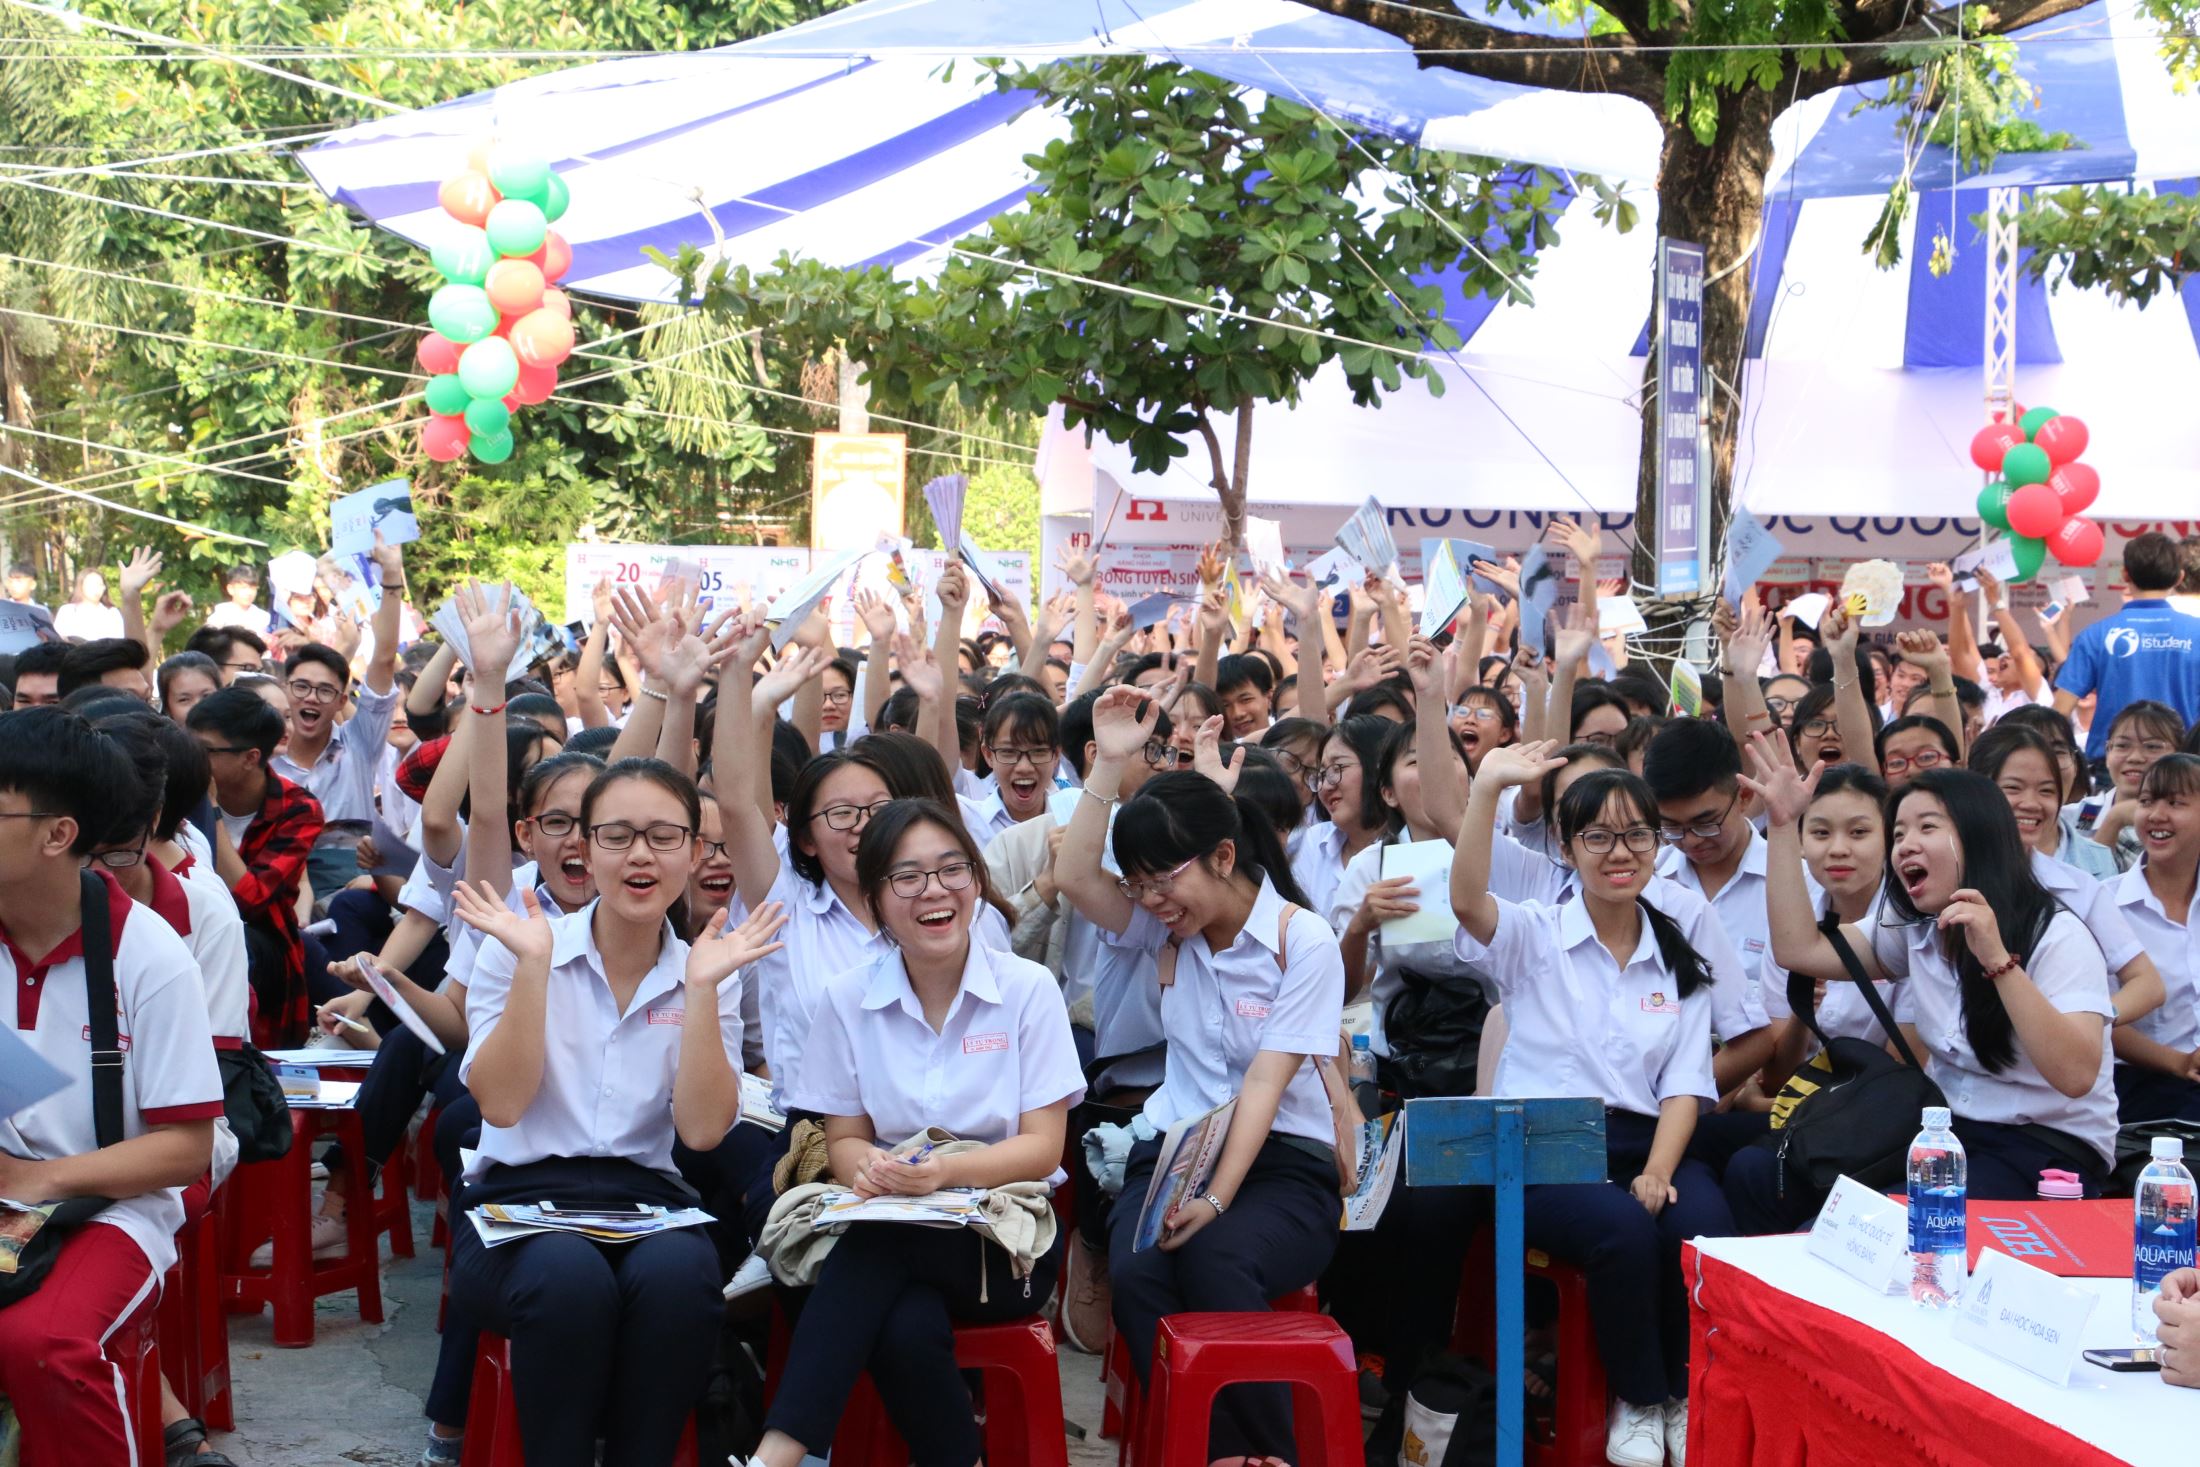 Nha Trang students were interested in the event.